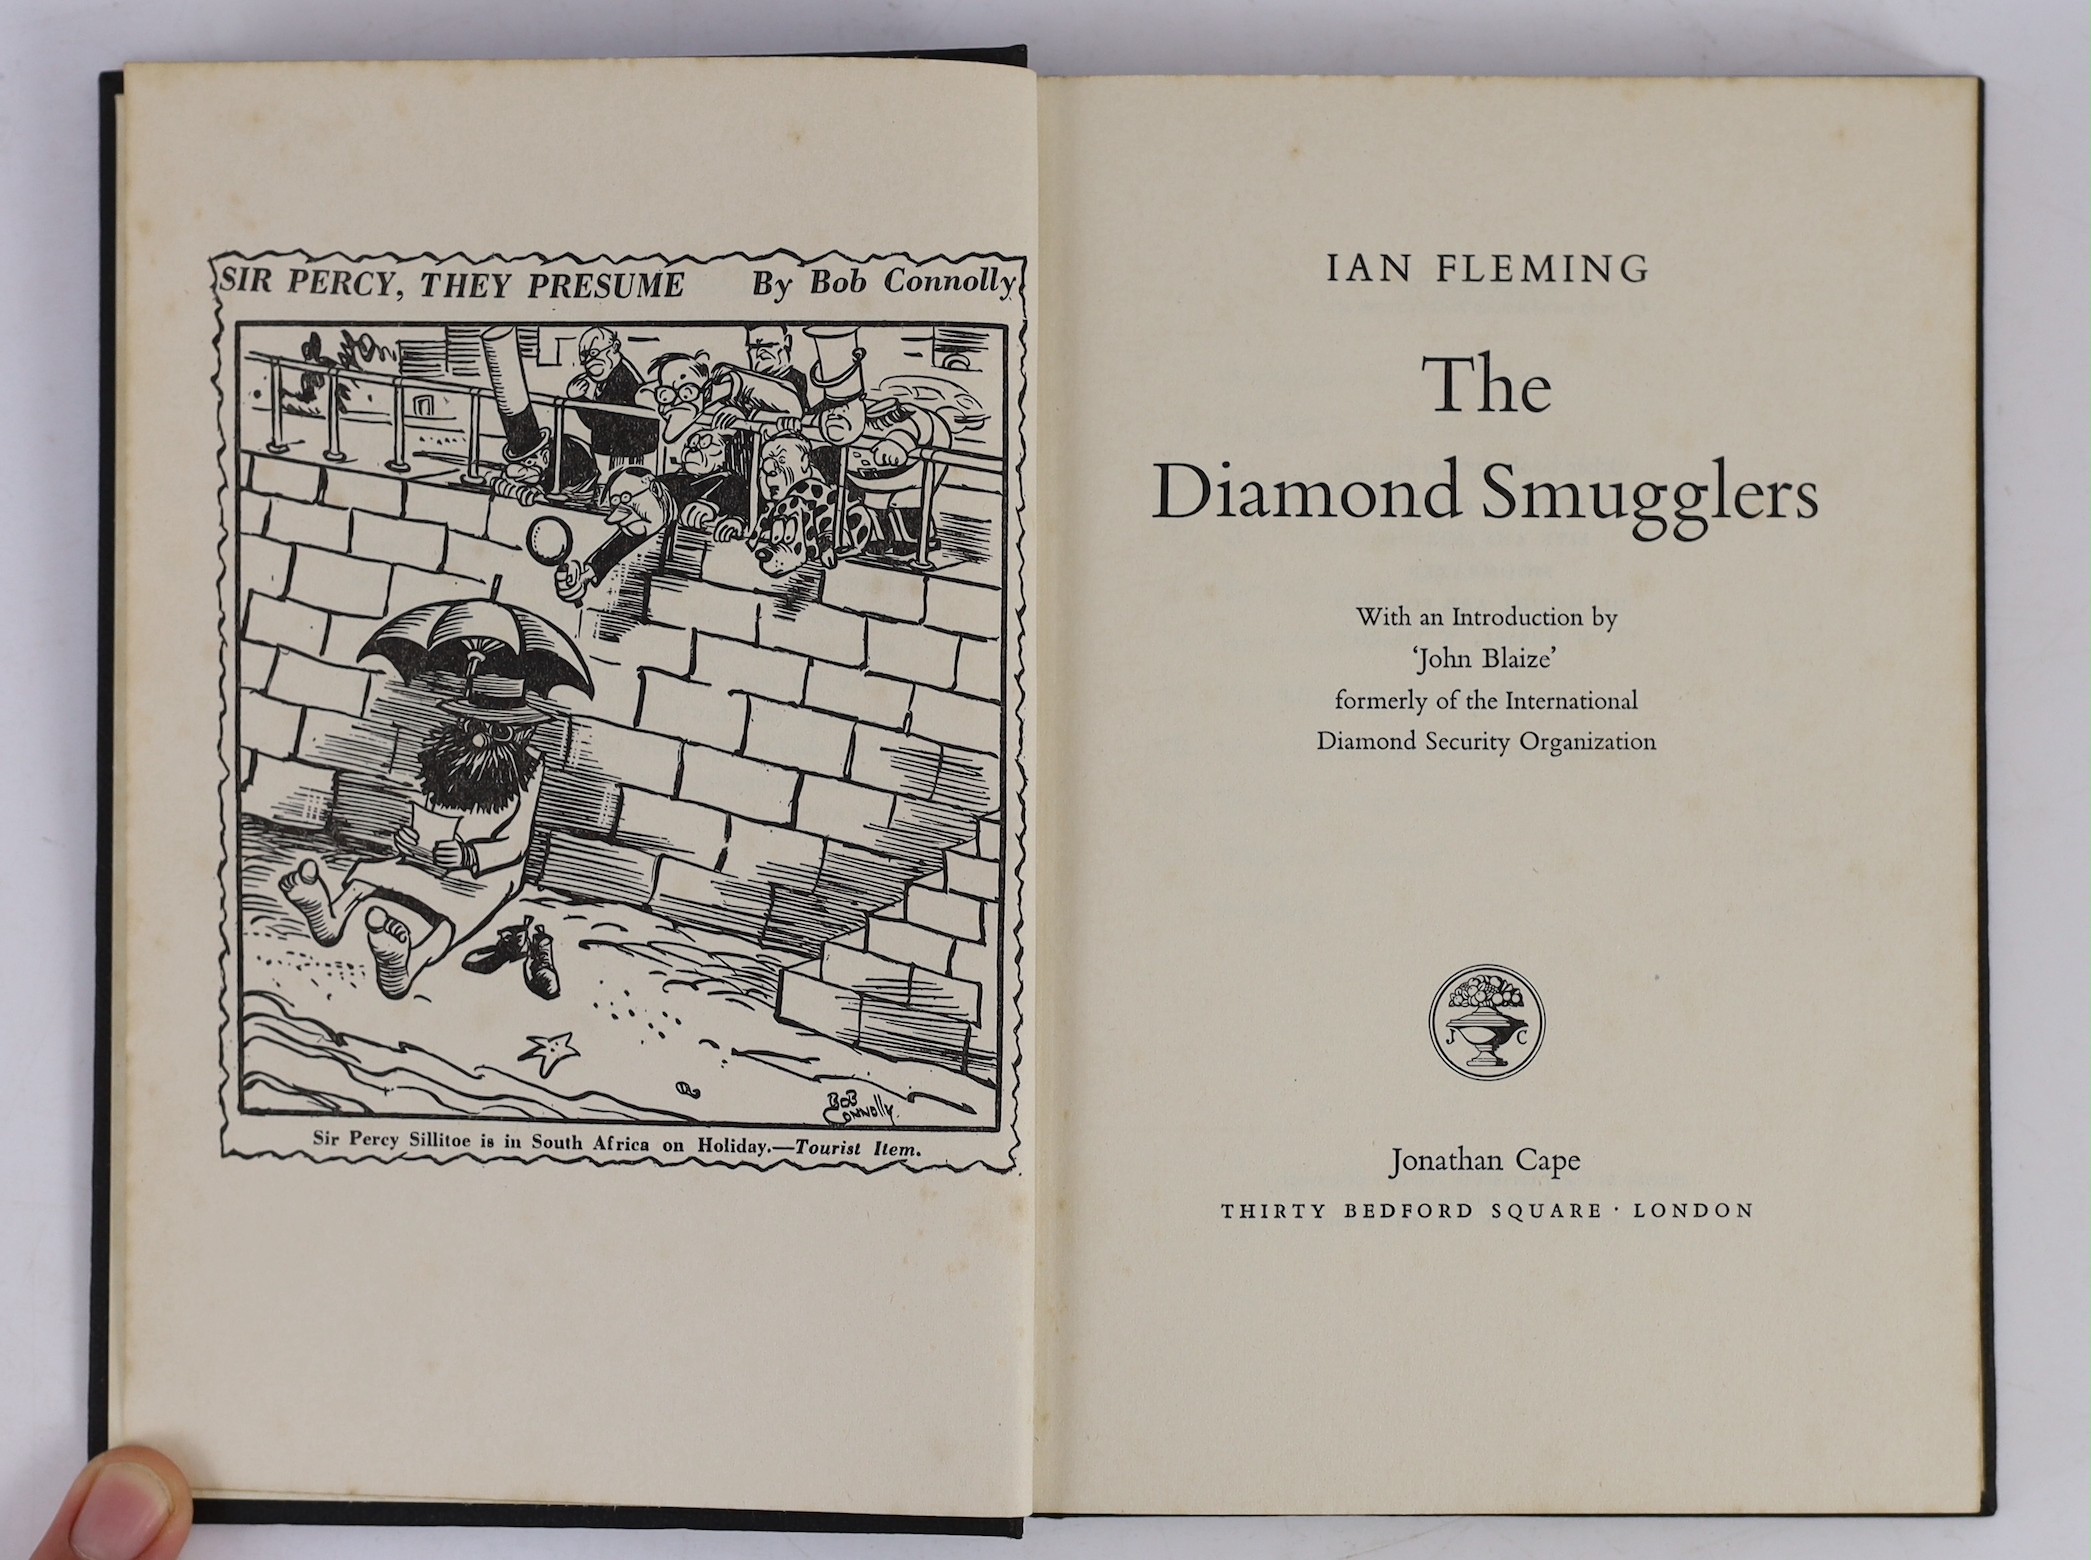 Fleming, Ian - From Russia, With Love. 1st Edition. half title and blurb leaf, pictorial cloth & (facsimile) d/wrapper. 1957; Fleming, Ian - You Only Live Twice. 1st Edition. half title & blurb leaf